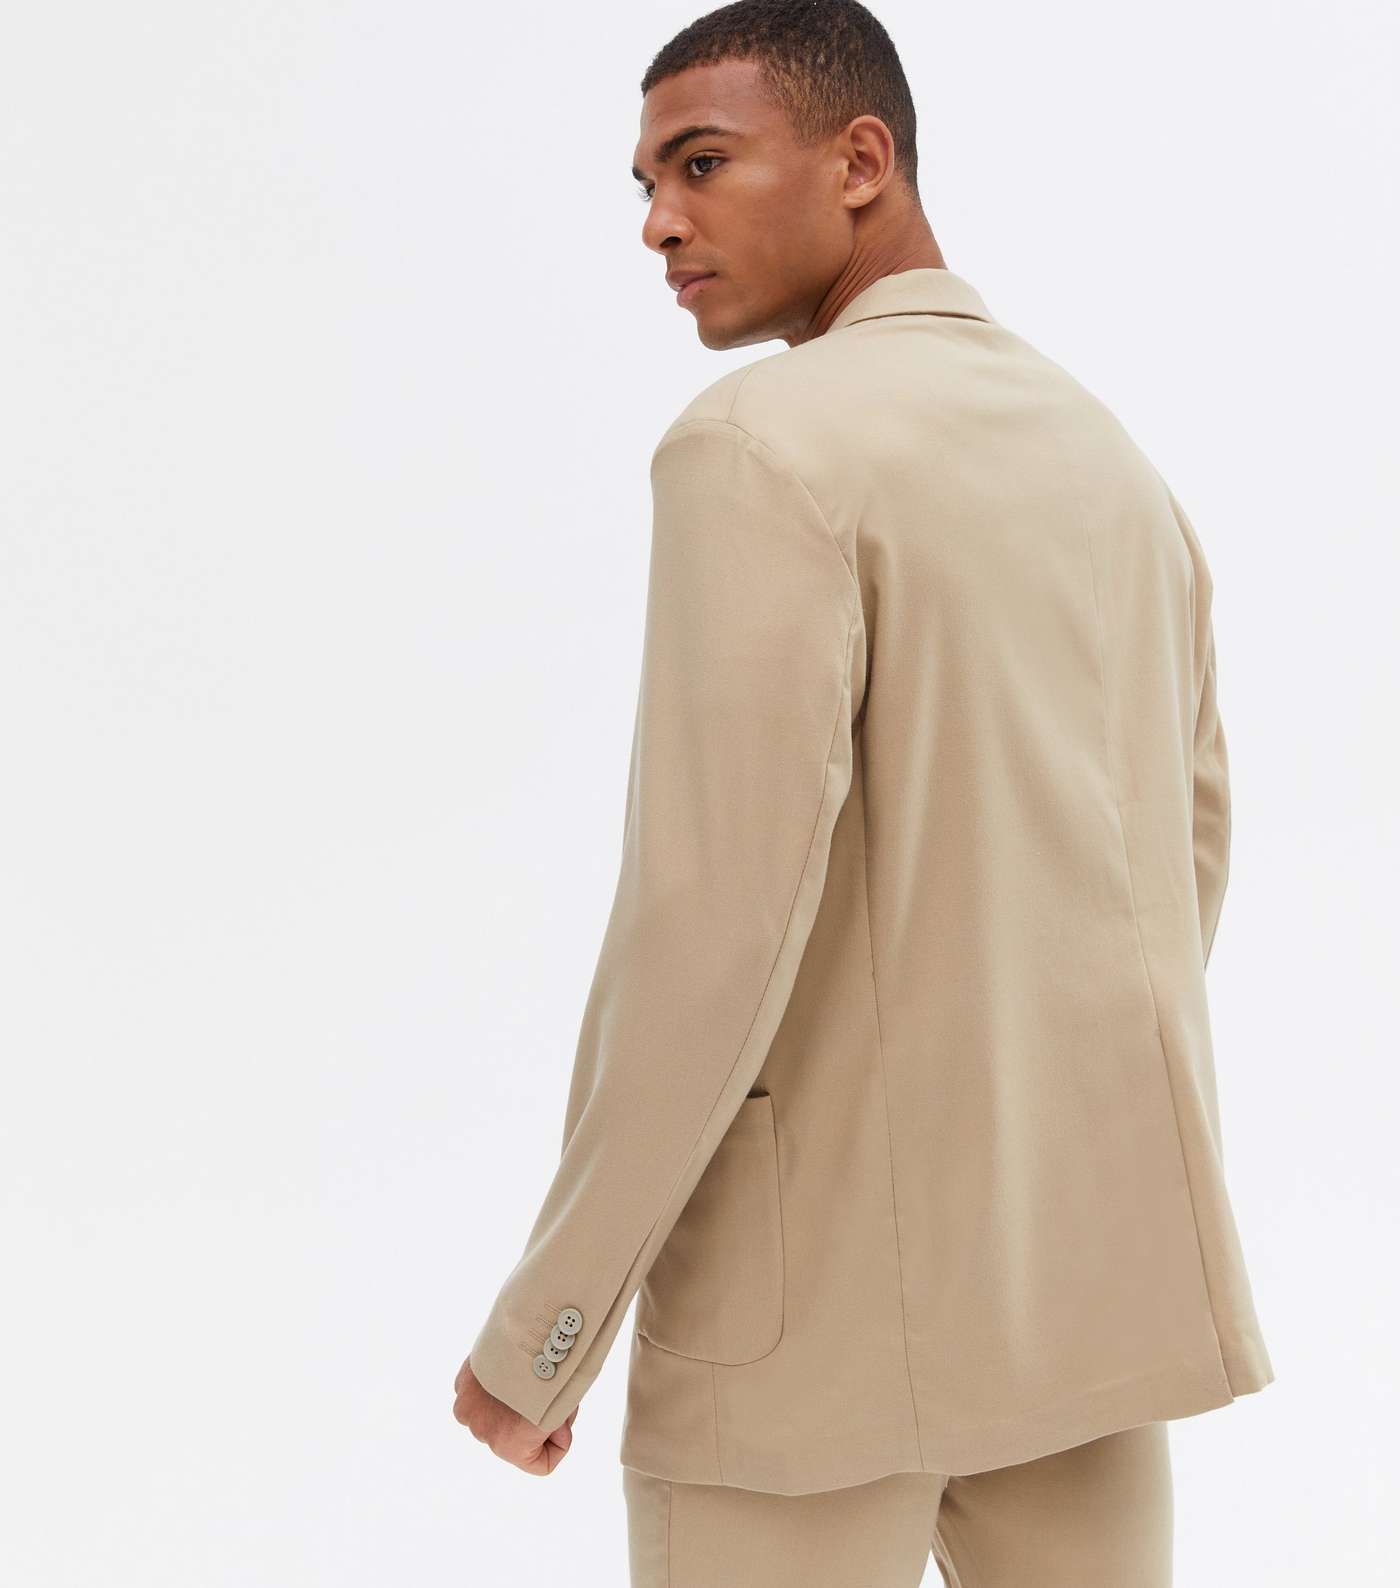 Tan Relaxed Fit Suit Jacket Image 4